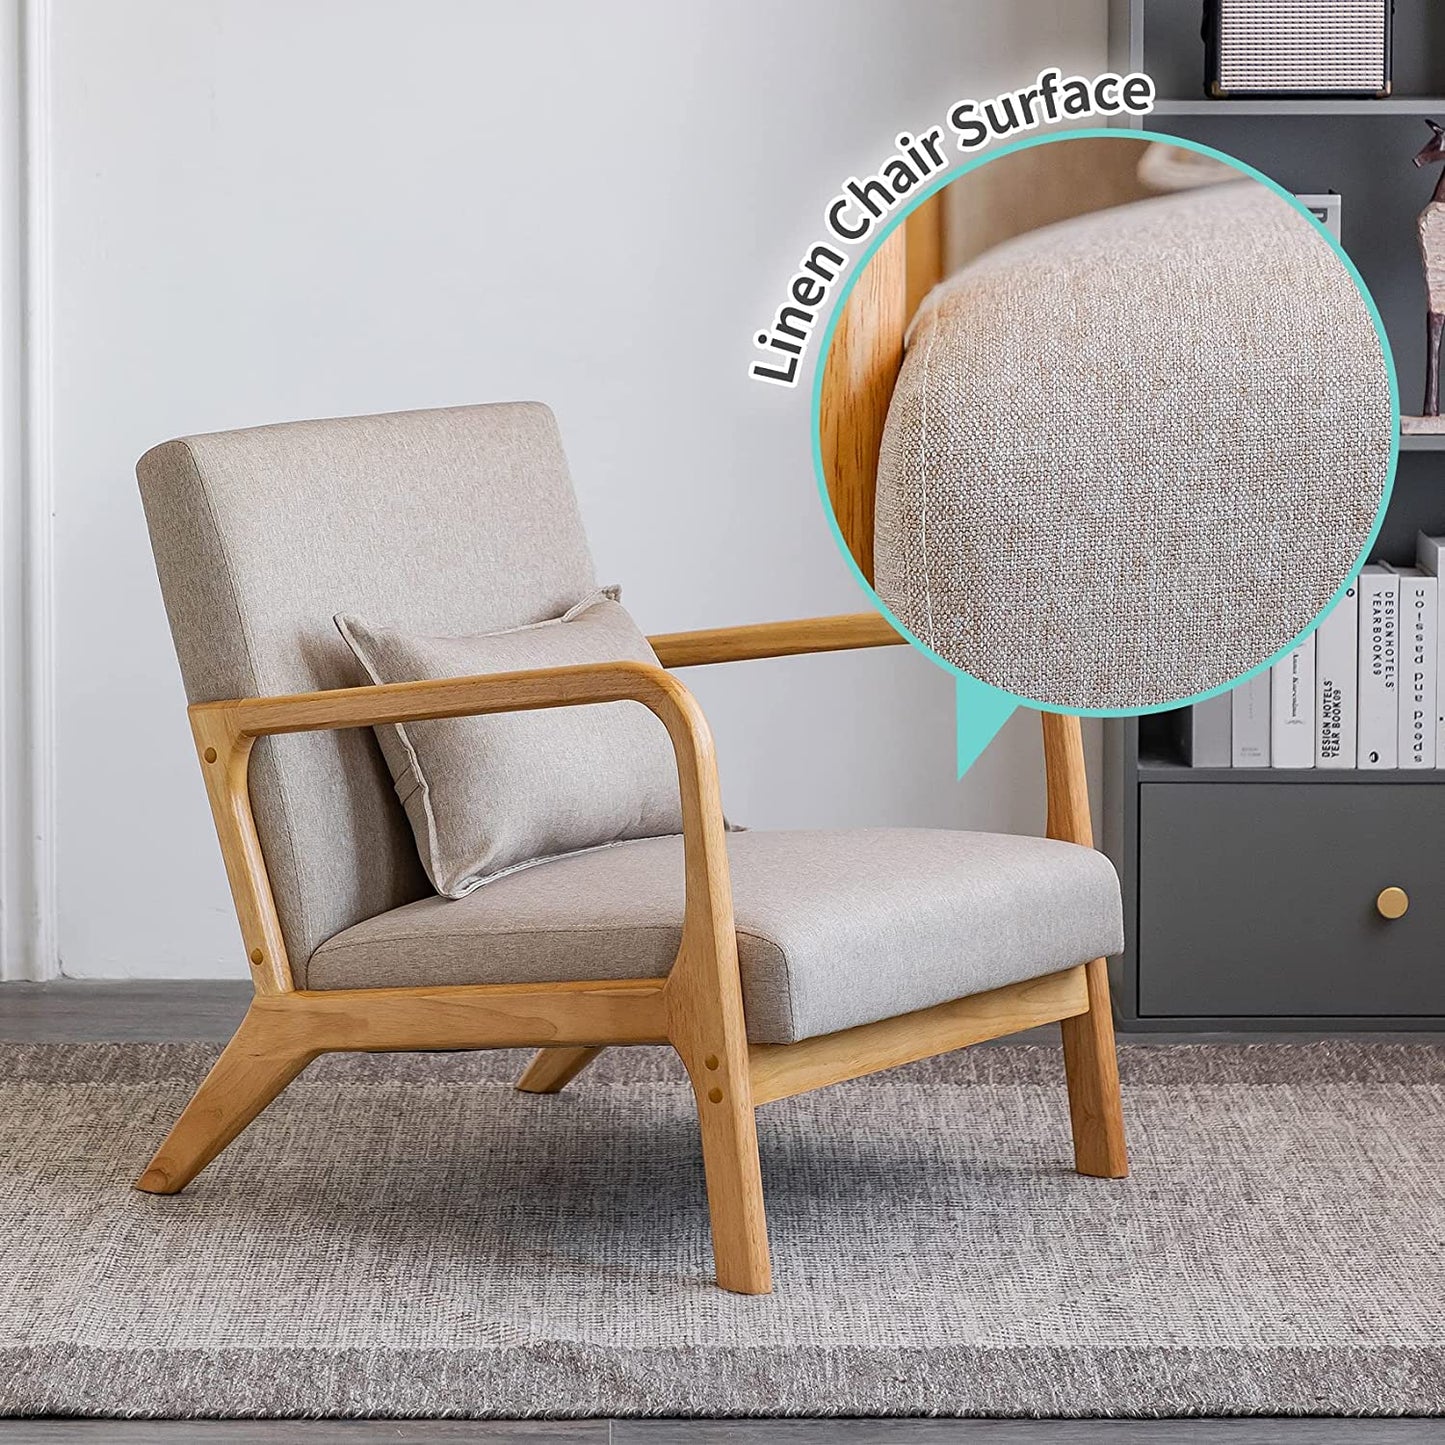 UNICOO - Mid-Century Modern Accent Chair, Fabric Reading Armchair, Easy Assembly, Lounge Chair for Living Room Bedroom (U1801)